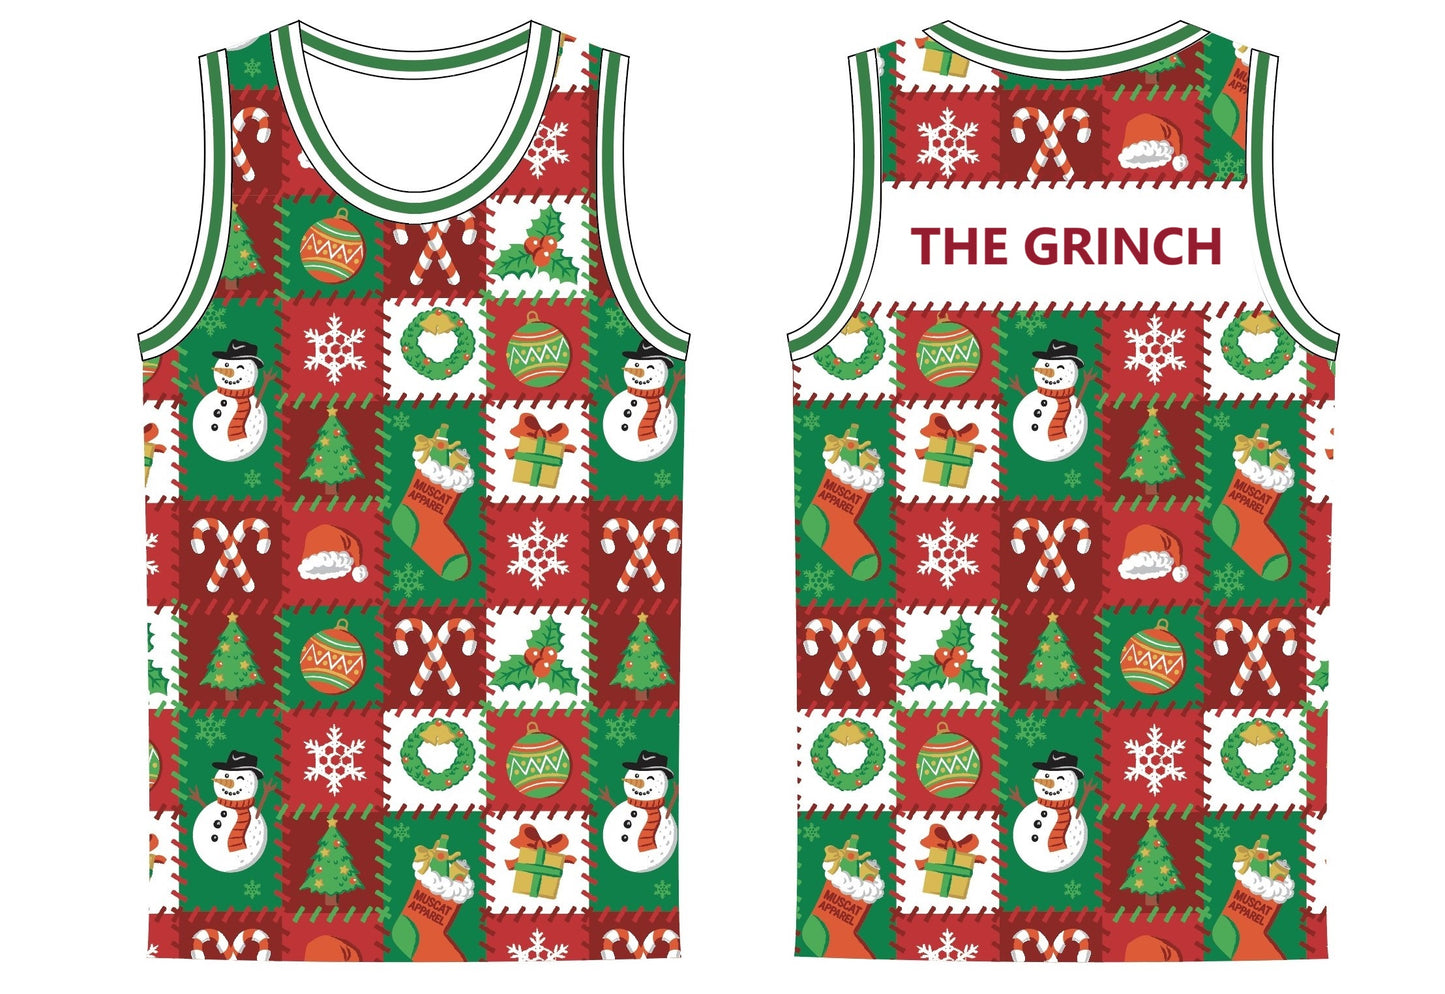 The 'THE GRINCH' Patchwork Jersey